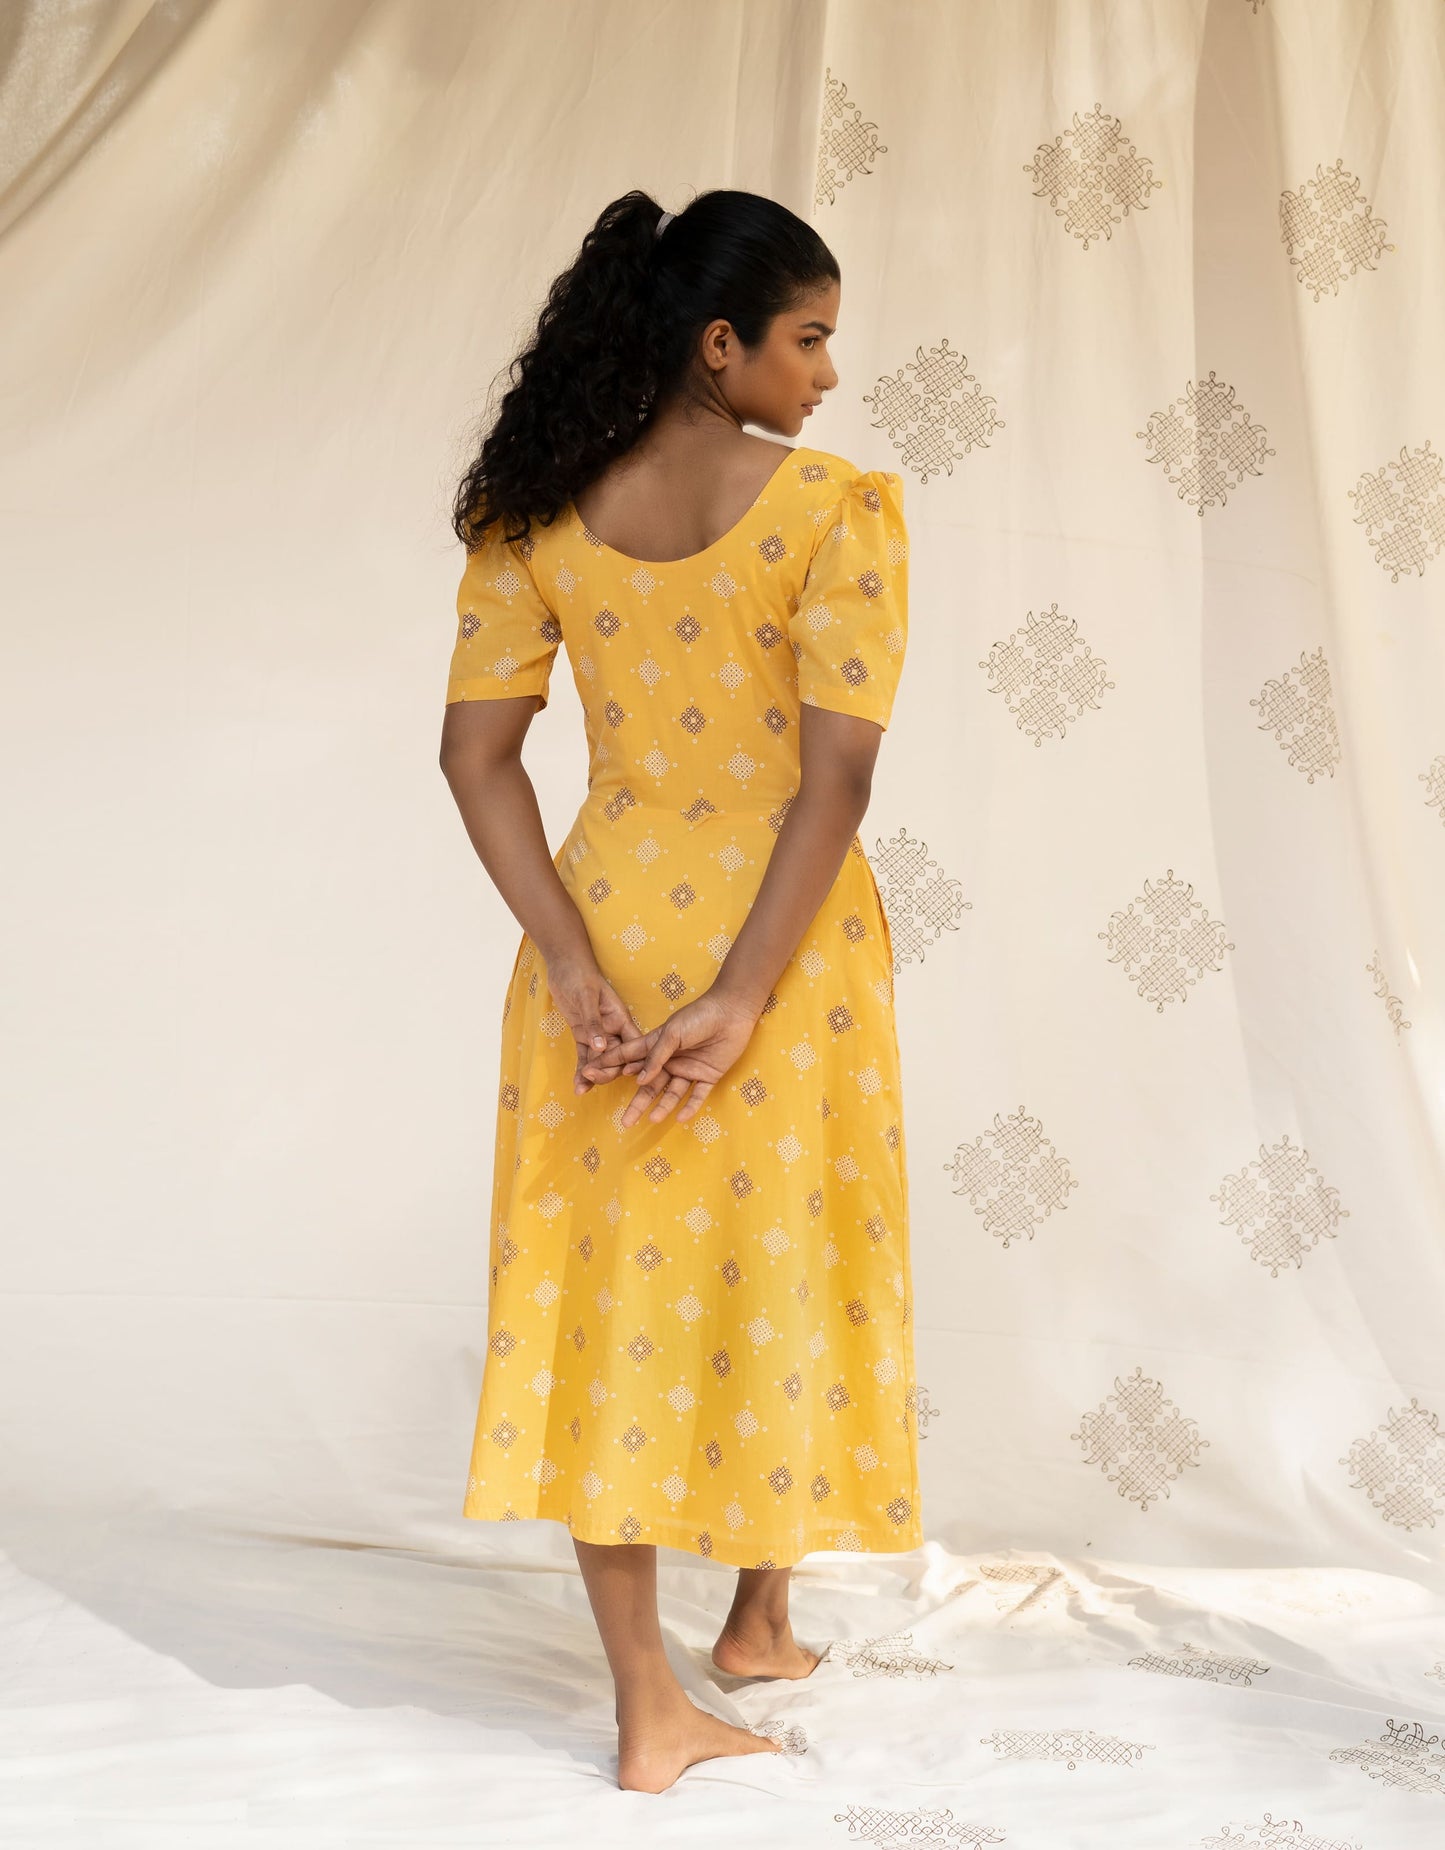 Hueloom Yellow Reversible  Cut-out Dress back view without cut in the centre